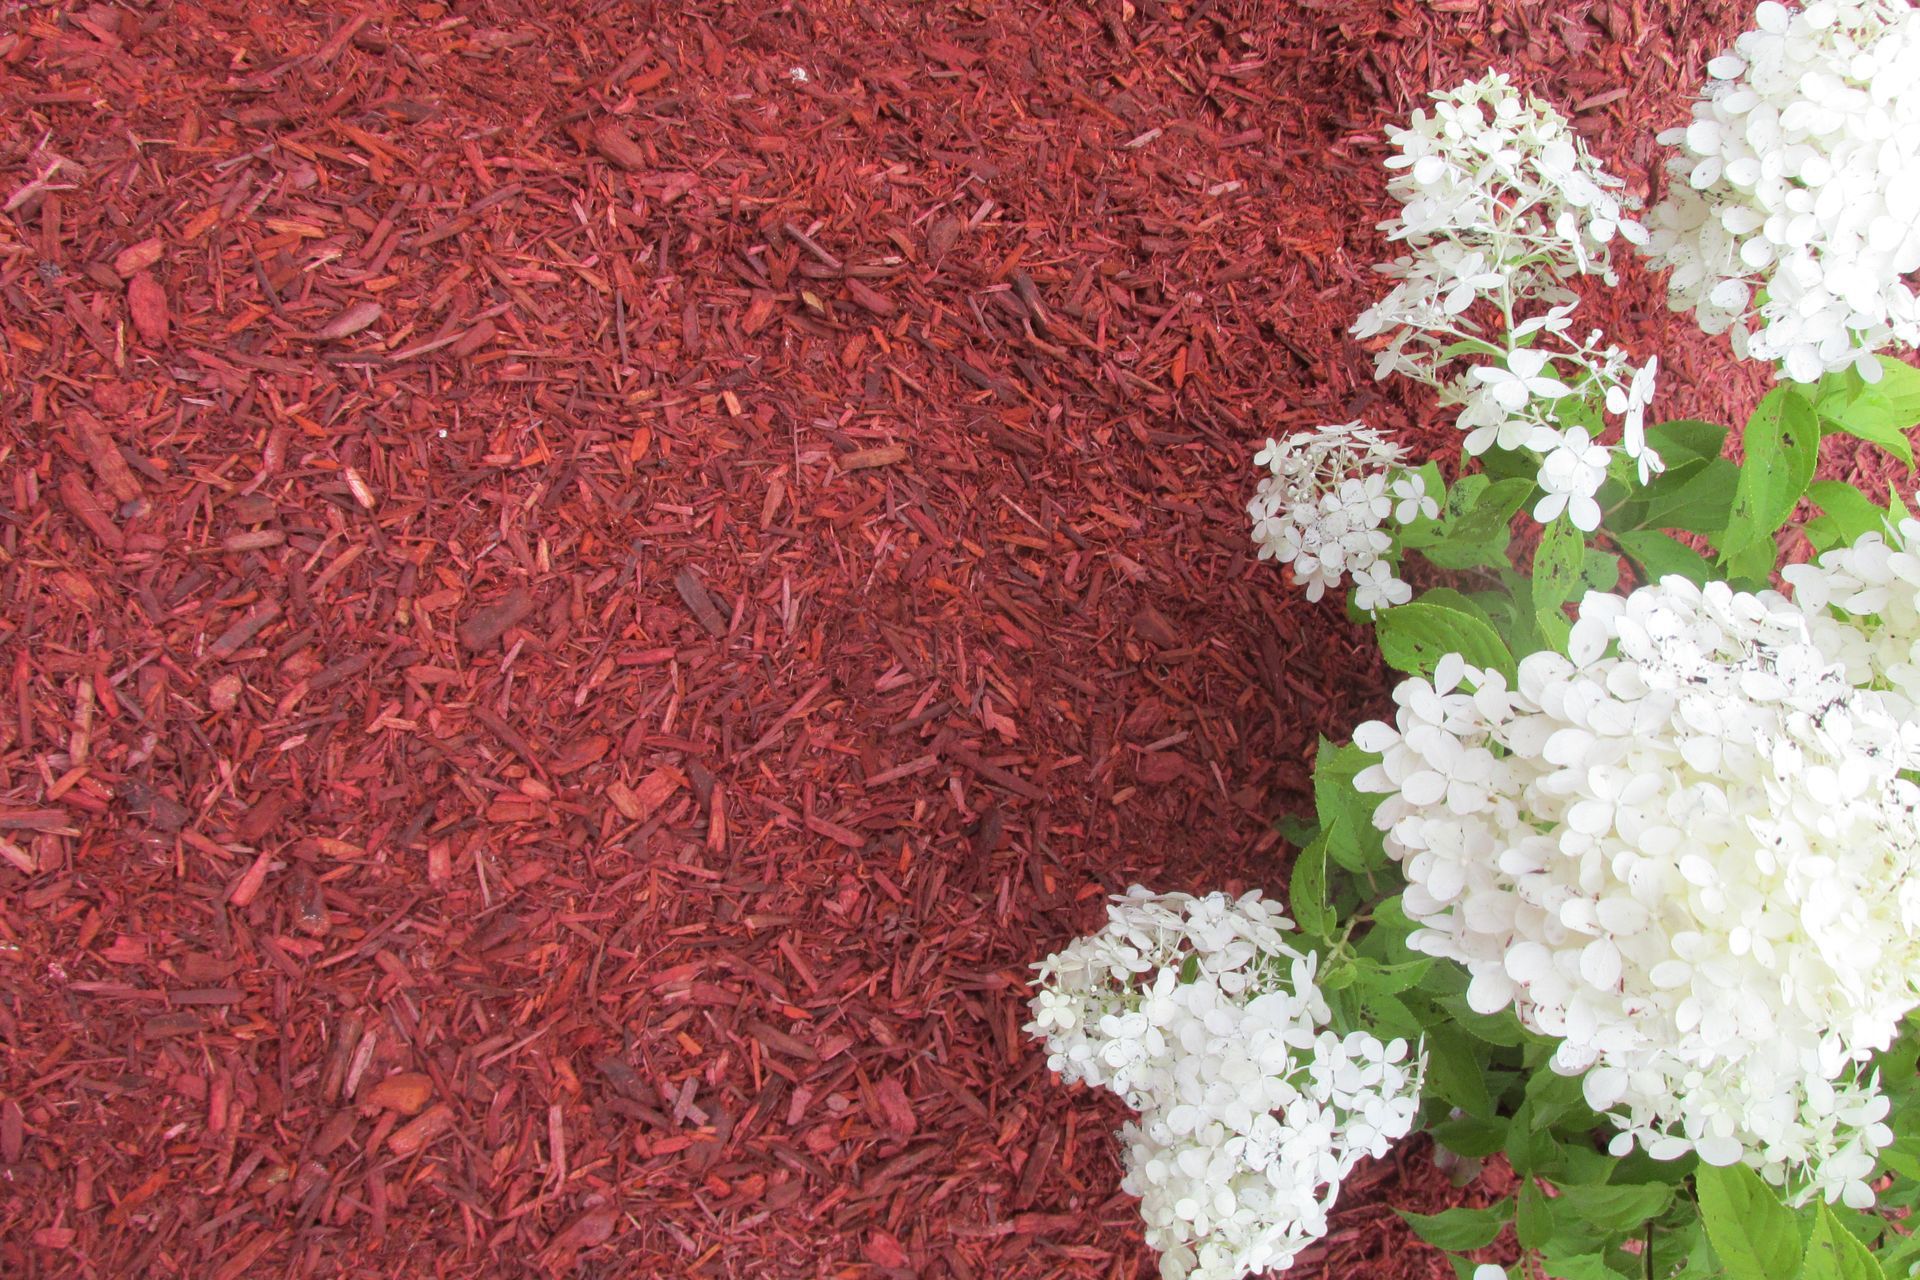 Bulk Country Red Dyed Mulch For Sale near me delivered to Lebanon, Annville, Palmyra, & Cornwall.